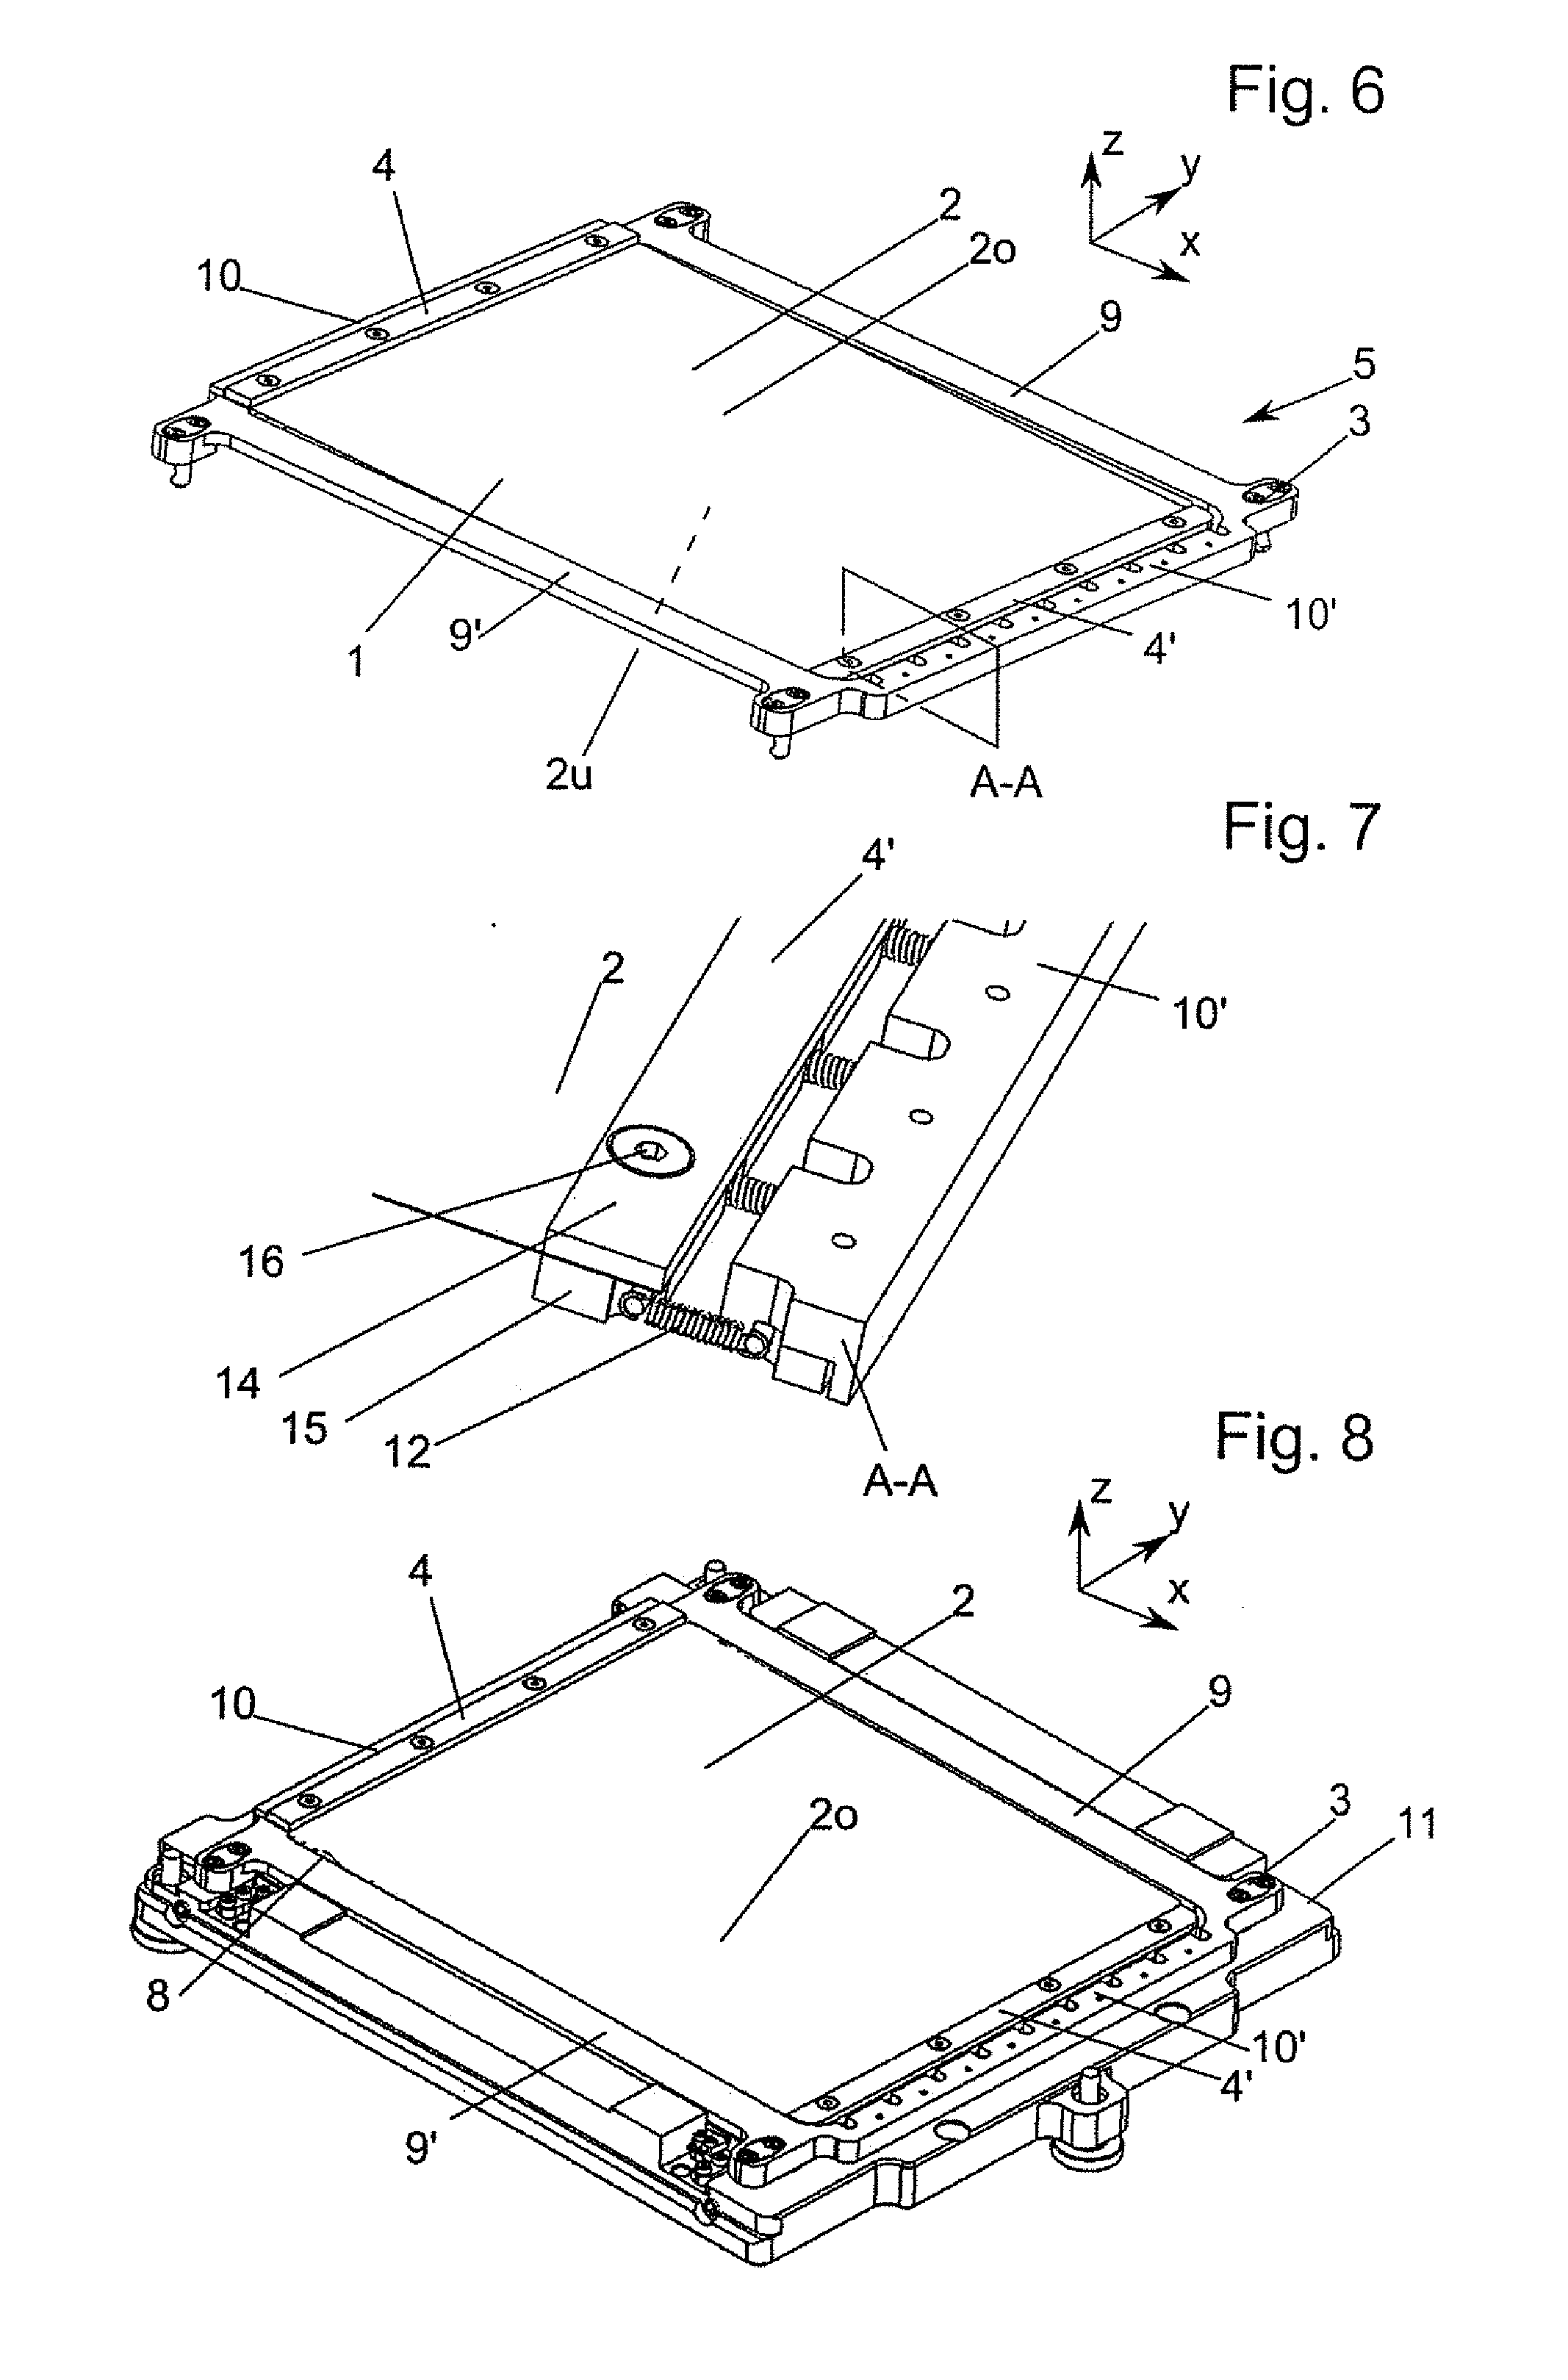 Structure stamp, device and method of embossing